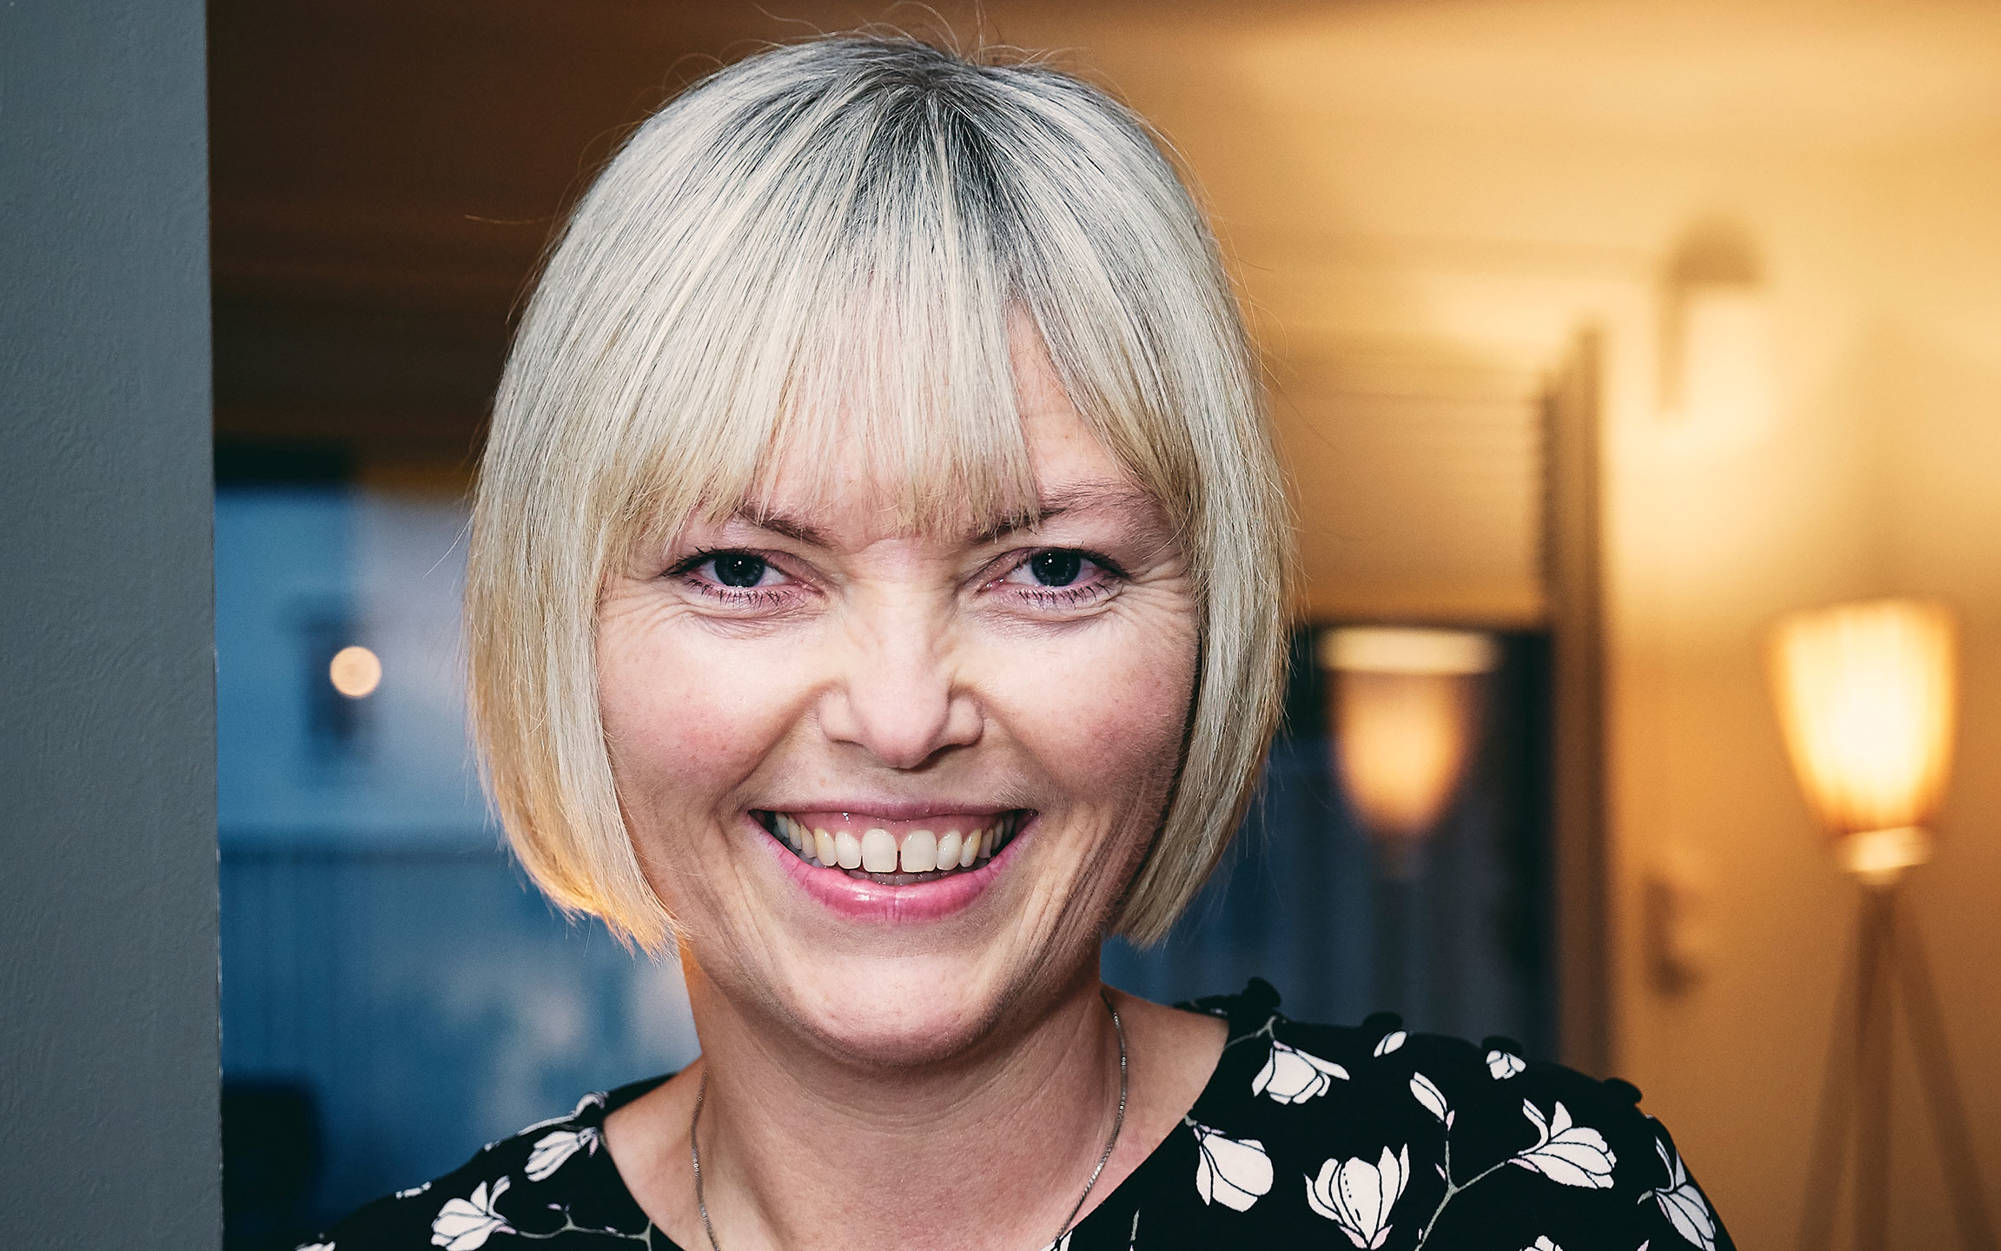 Norunn Folsvik is not afraid of diving into new challenges